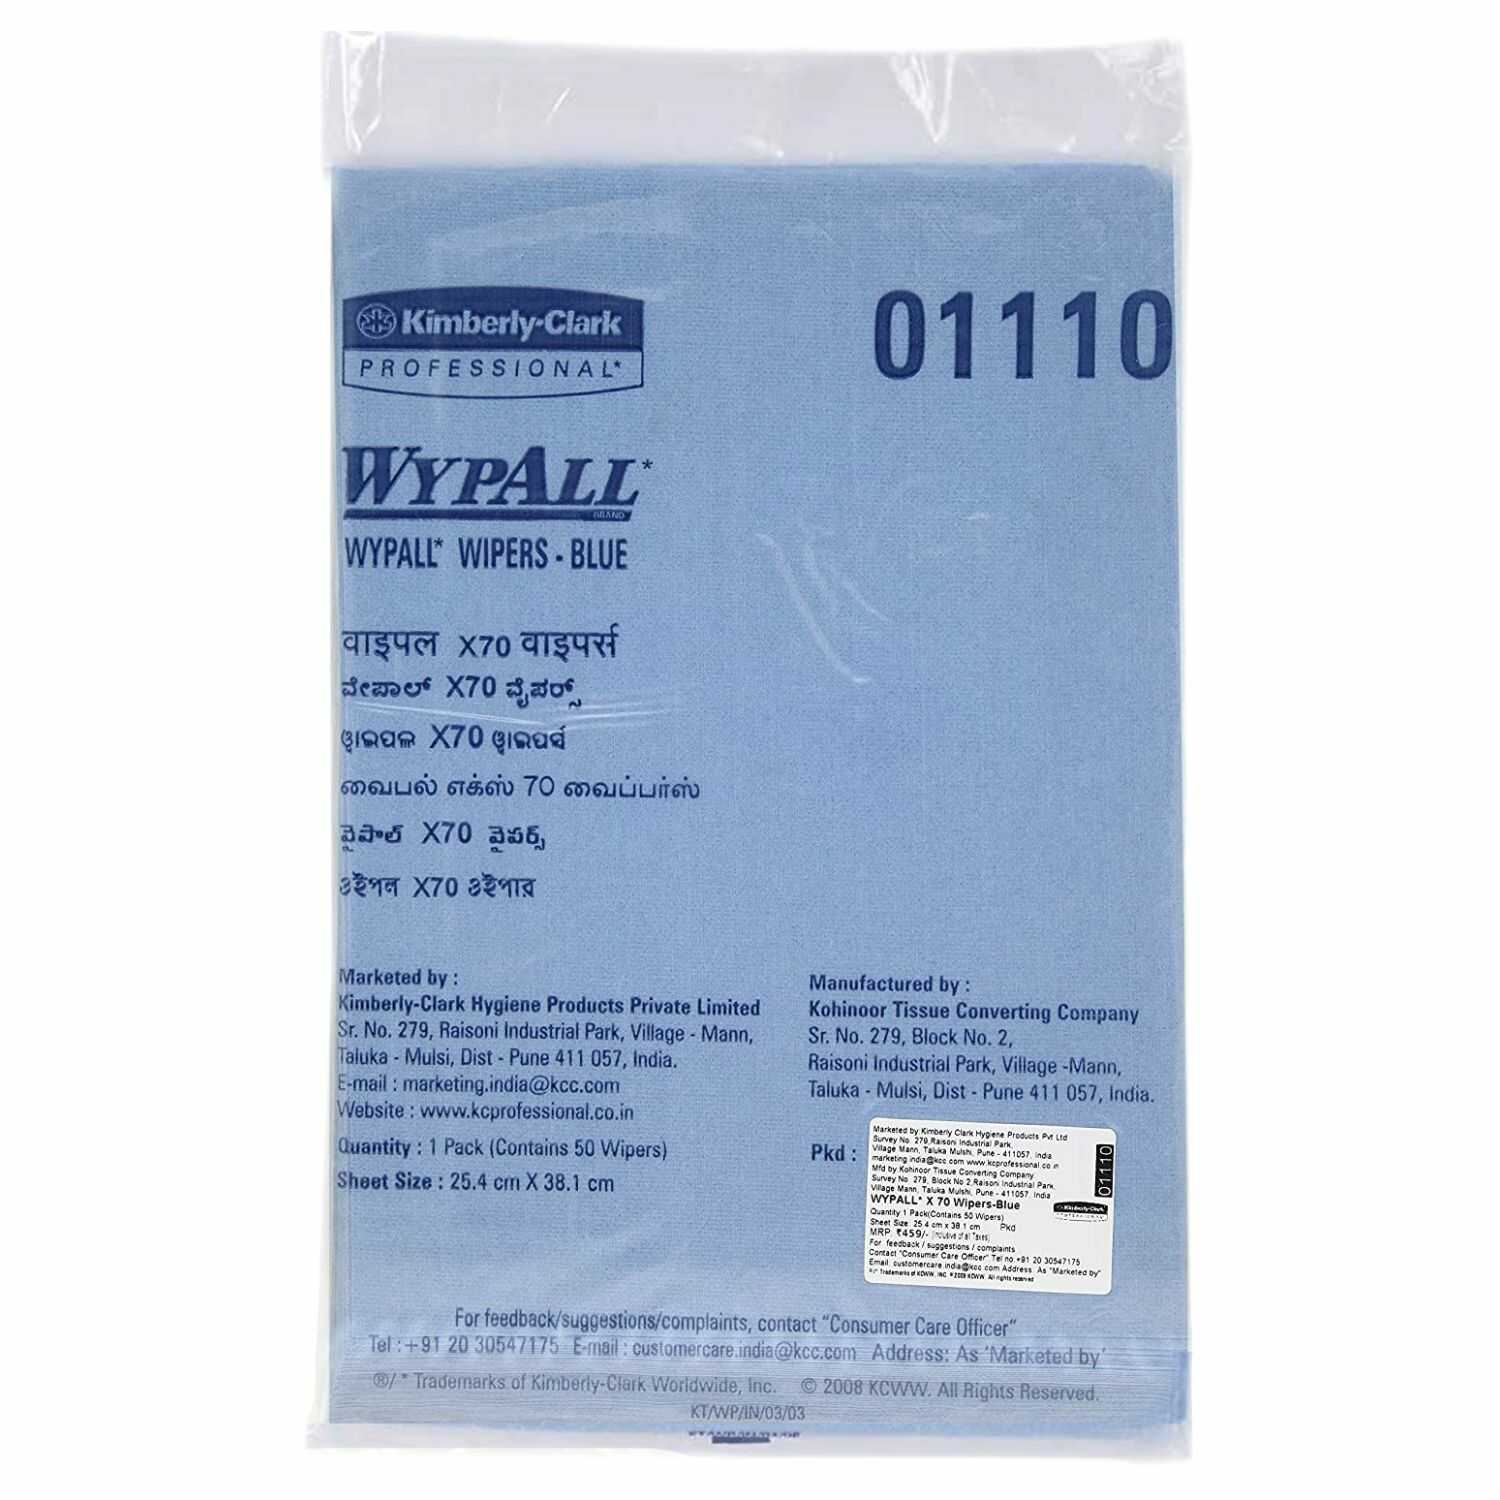 Wypall X70 Wipers / Flat Sheet / Blue / 25.4 cm x 38.1 cm, 1110 (Pack of 20)